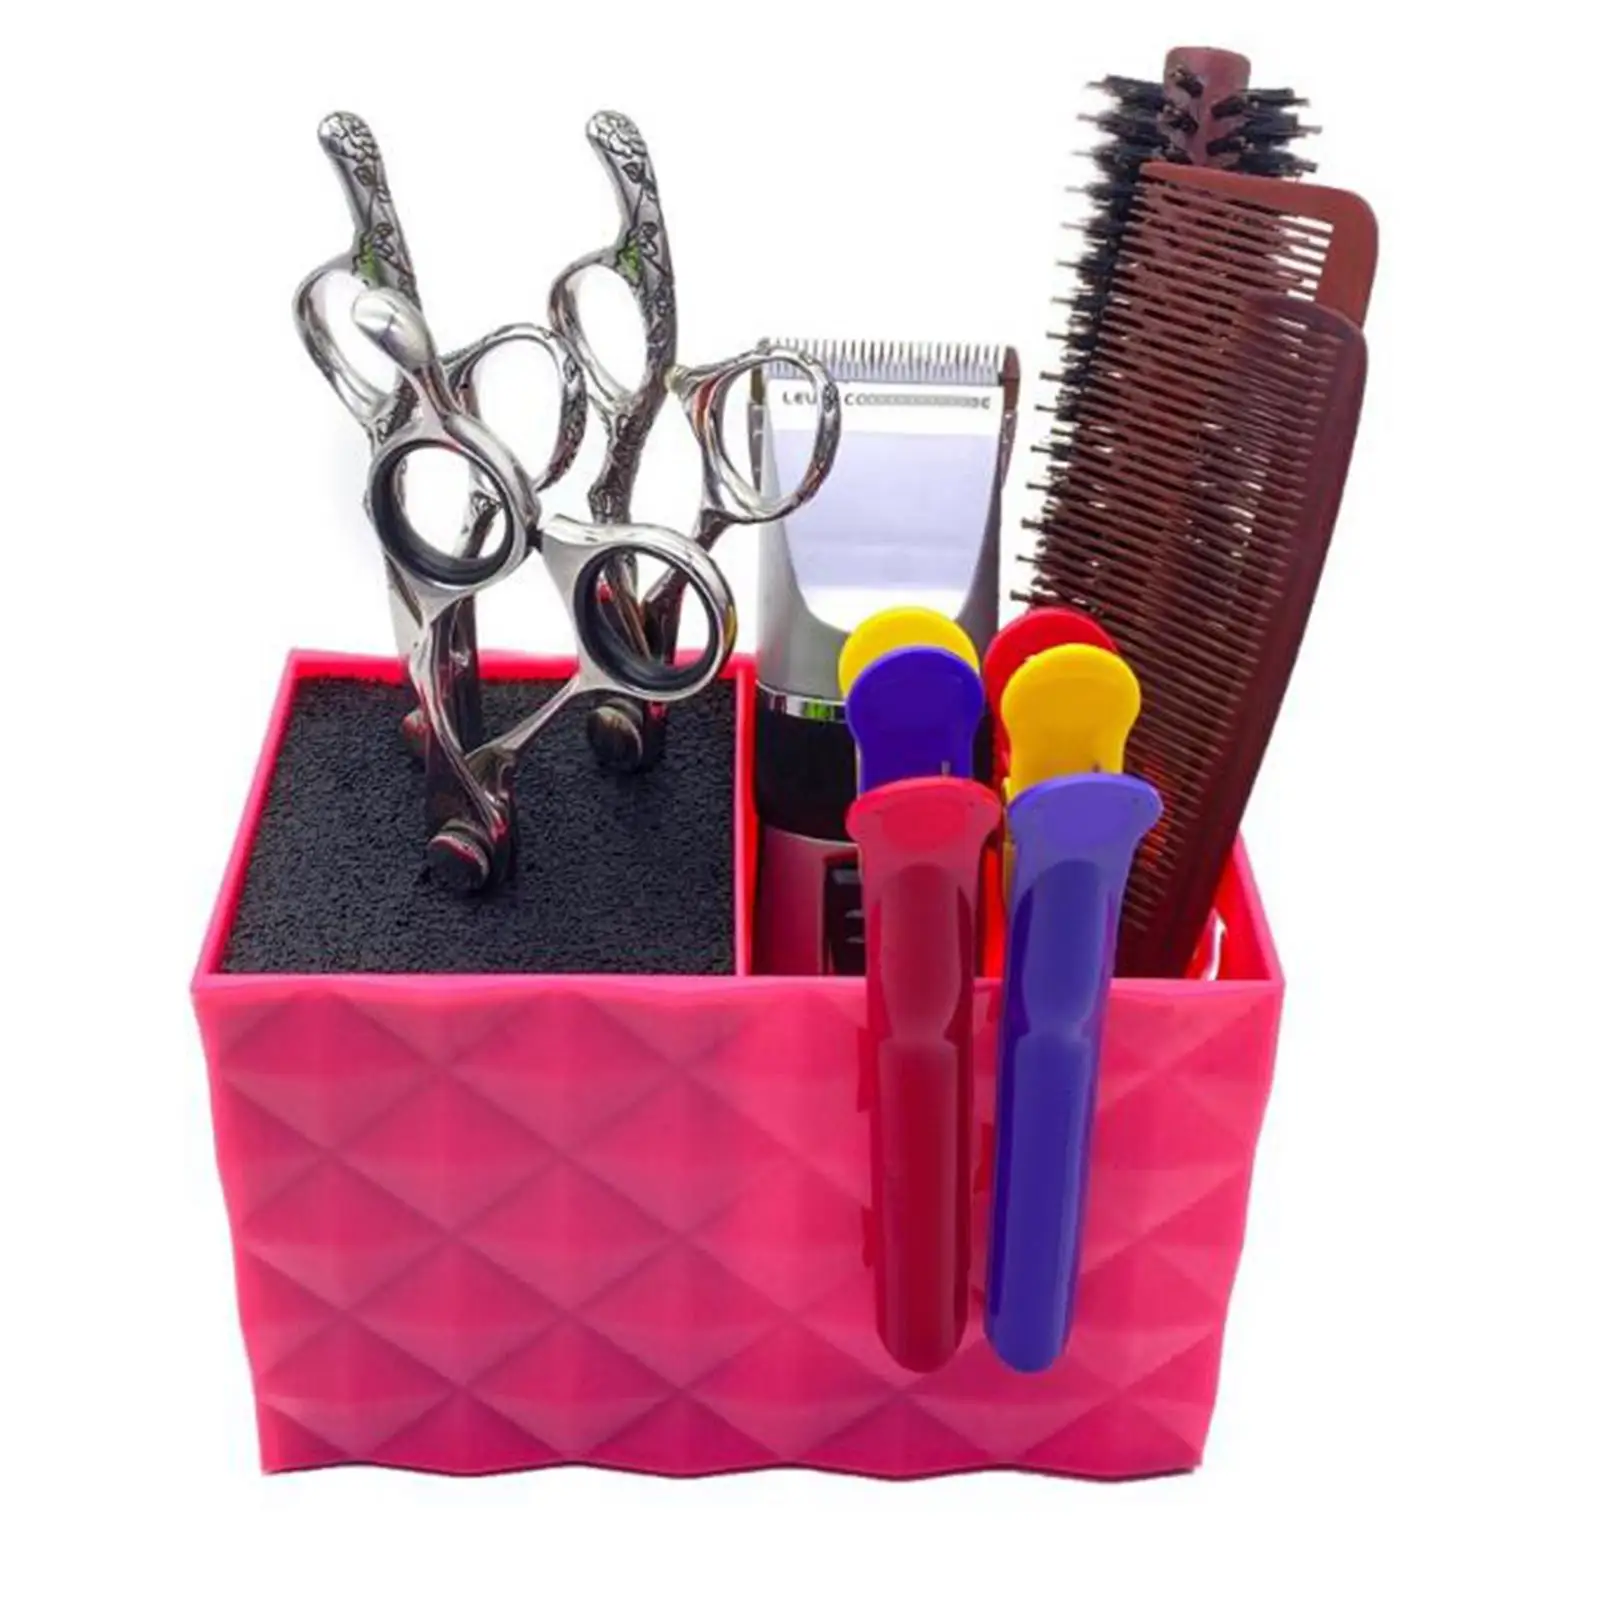 Barber Shop Scissor Organizer Stand Scissor Combs Clips Holder for Pet Groomer Salon Use Hairstyling Hair Brushes Home